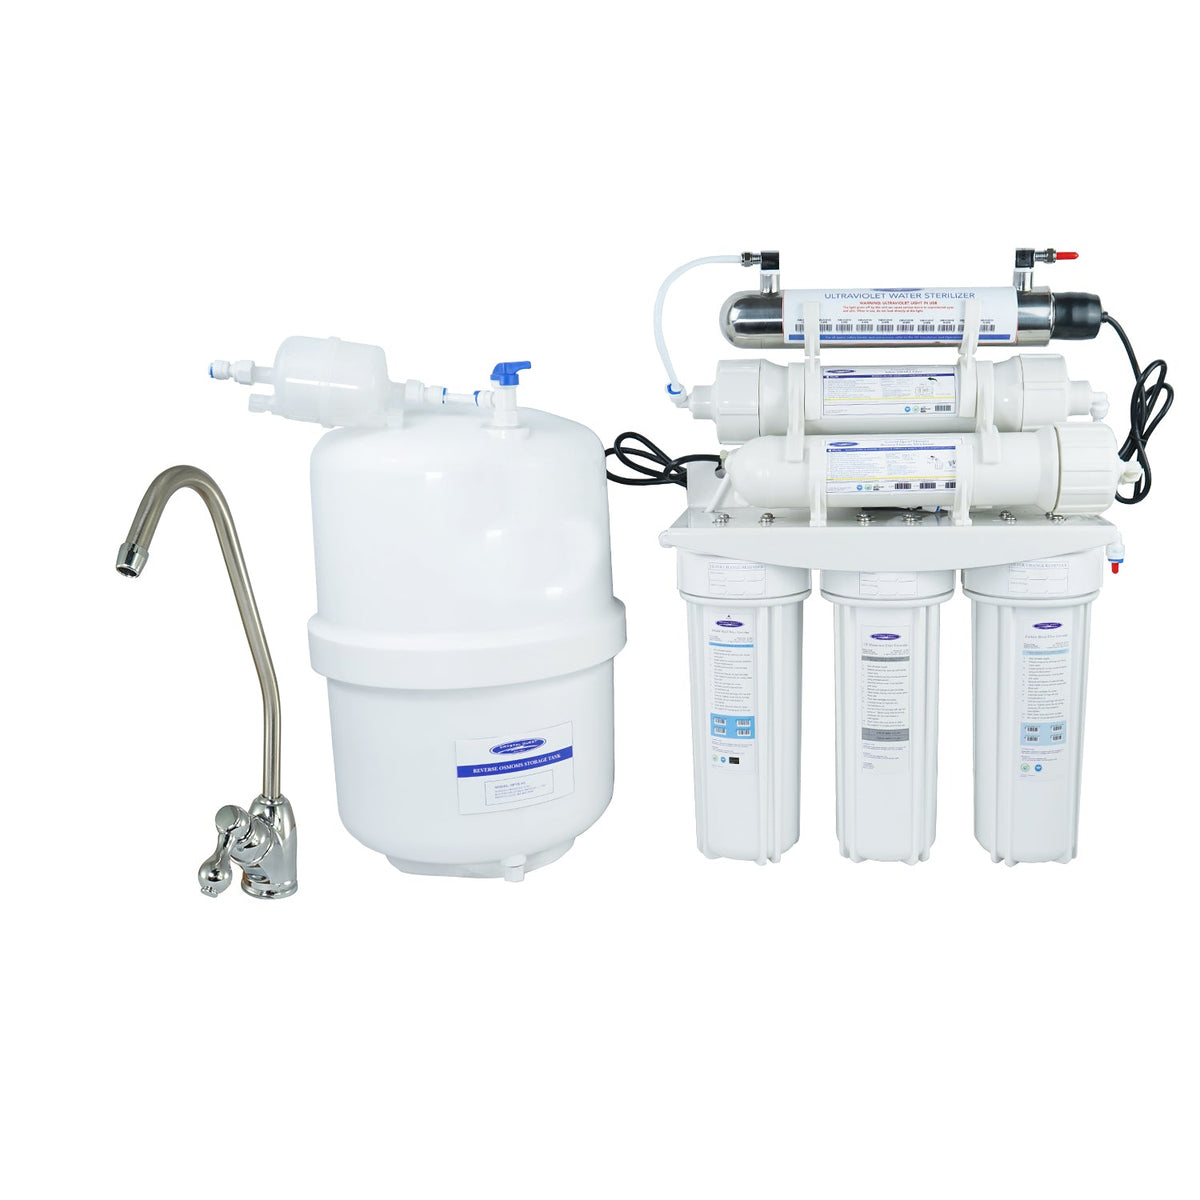 Thunder Ultrafiltration/Reverse Osmosis Under Sink Water Filter | 4000C | 14 Stages of Filtration - Reverse Osmosis System - Crystal Quest